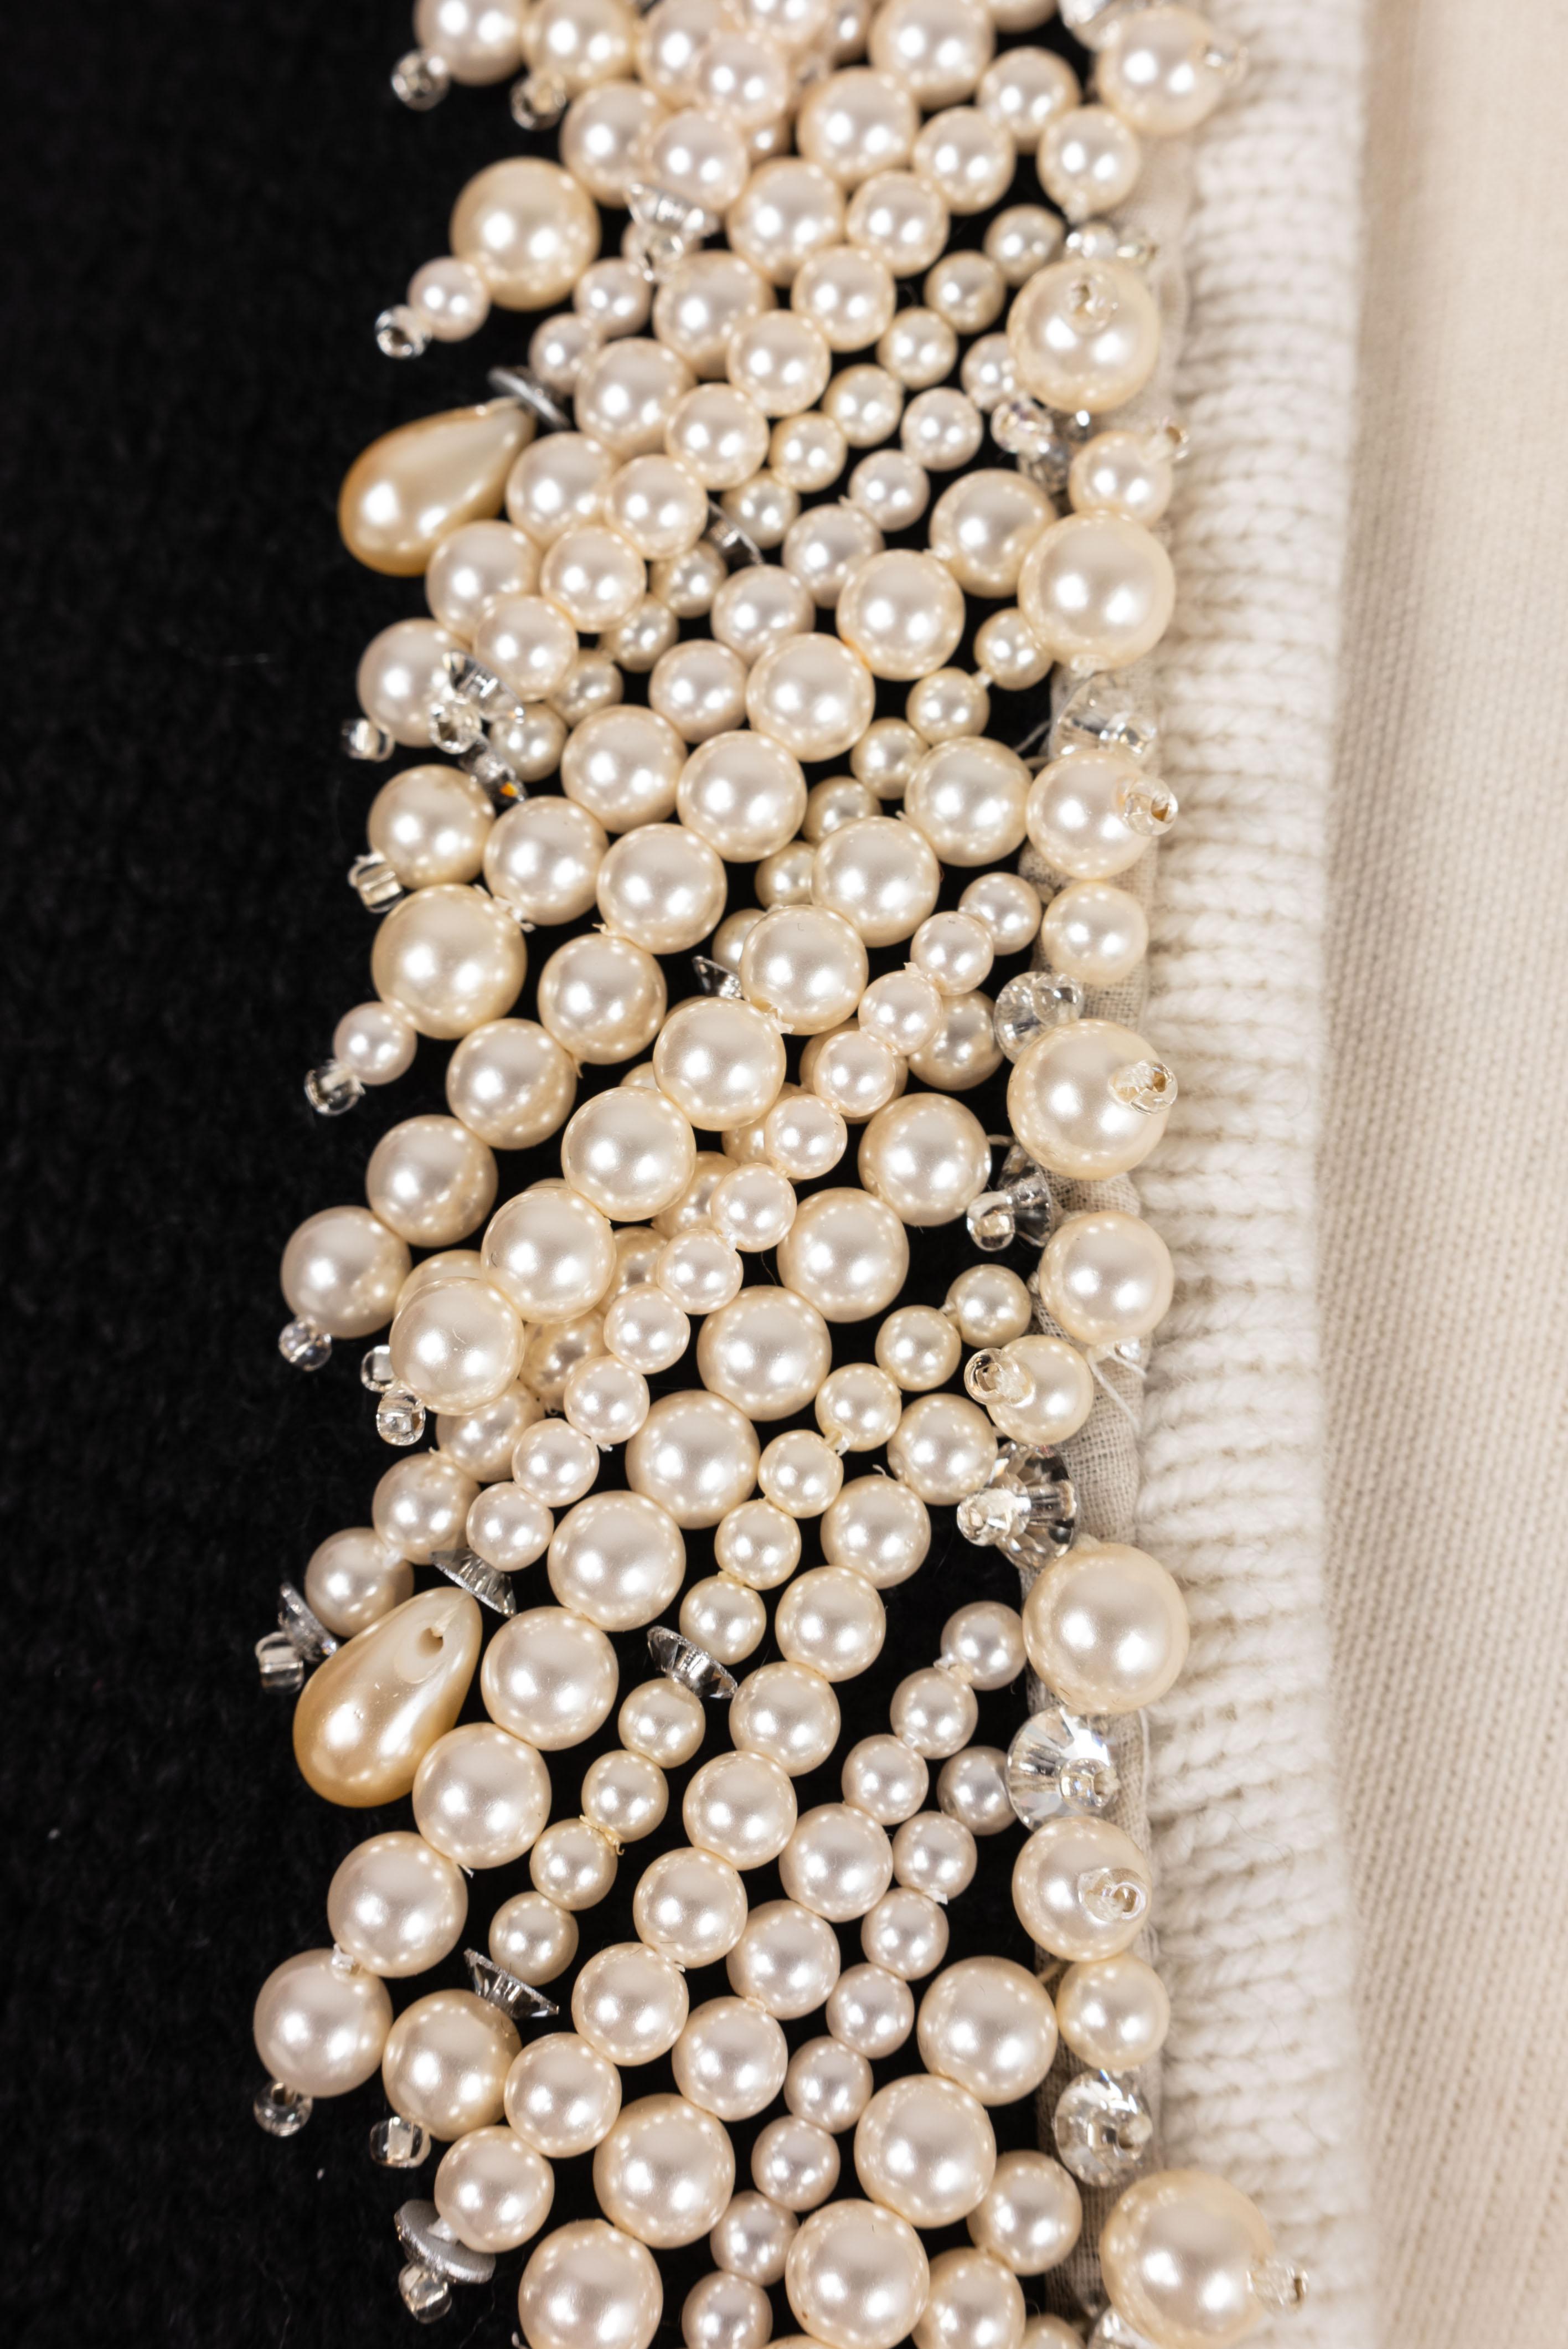 Chanel cardigan with pearls 2021 5